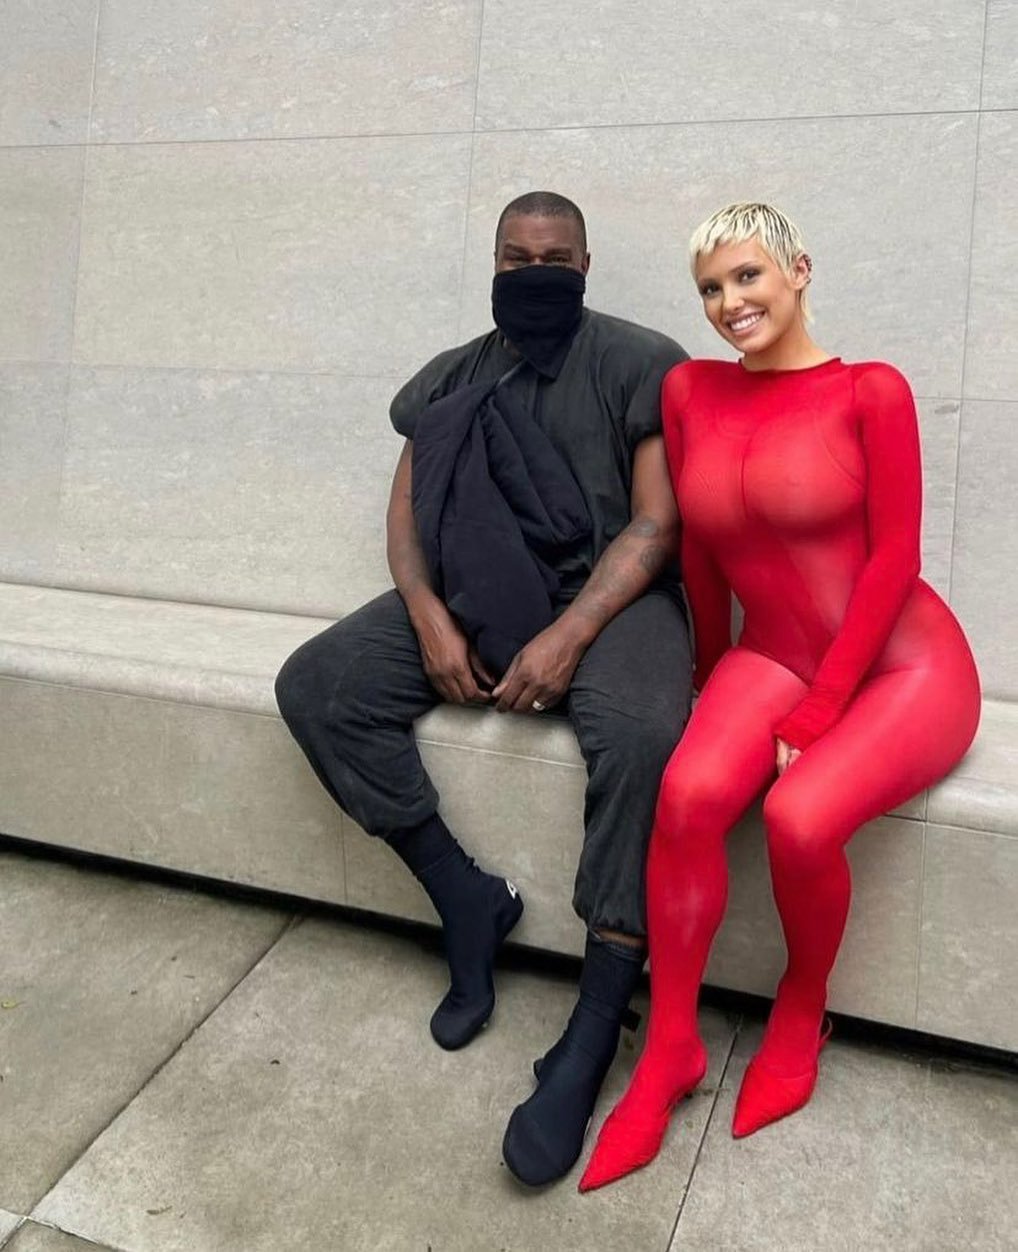 Kanye West and Bianca Censori will likely remain in the headlines in 2024